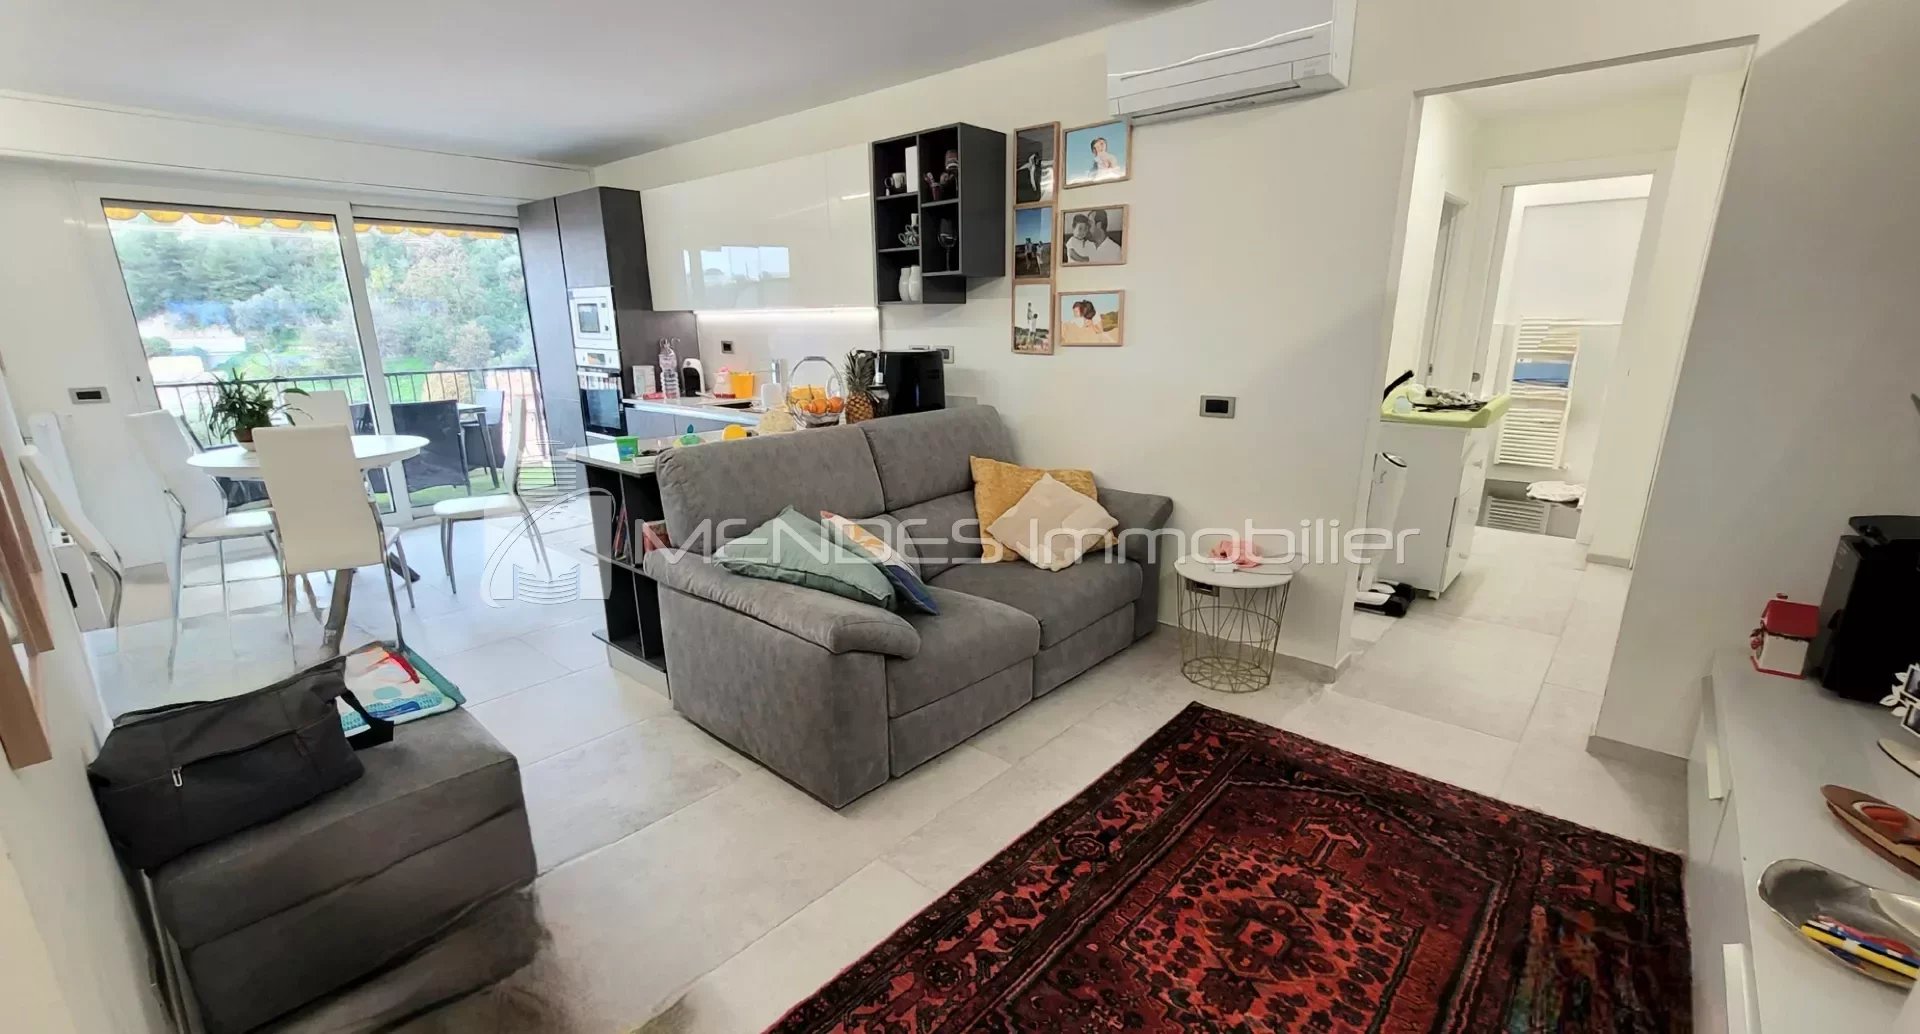 Magnificent, bright, fully renovated 3-room apartment